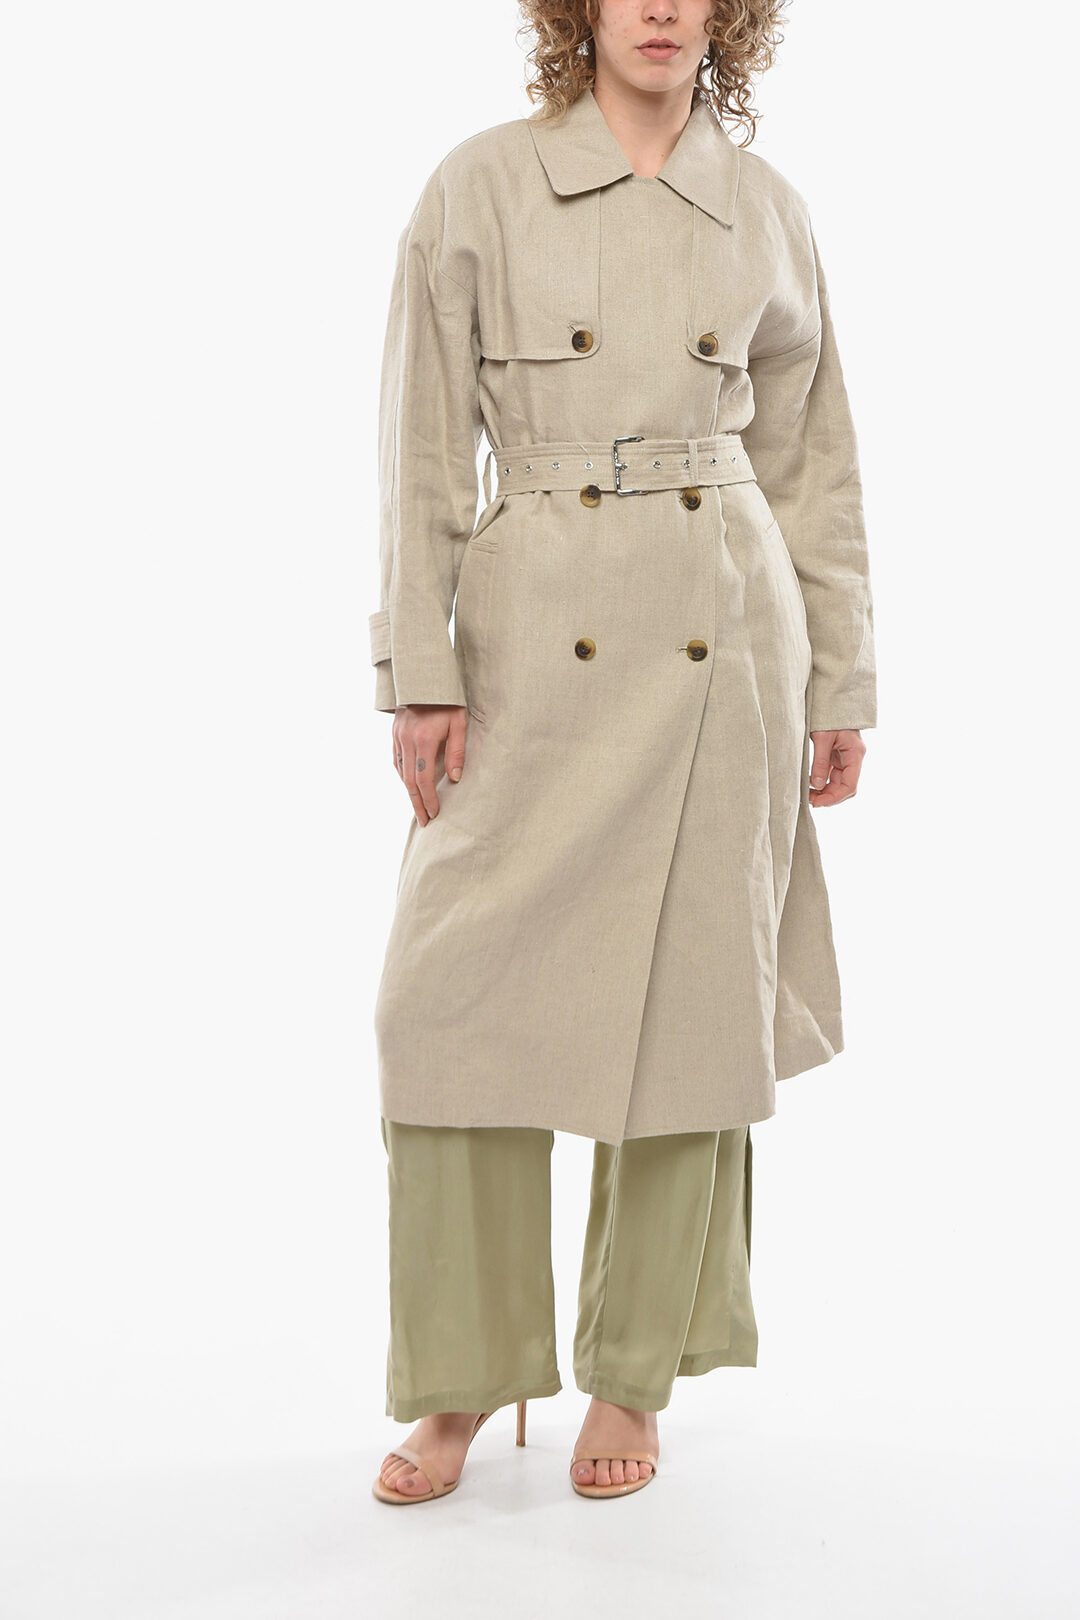 Michael Linen Double Breasted Trench with women - Outlet